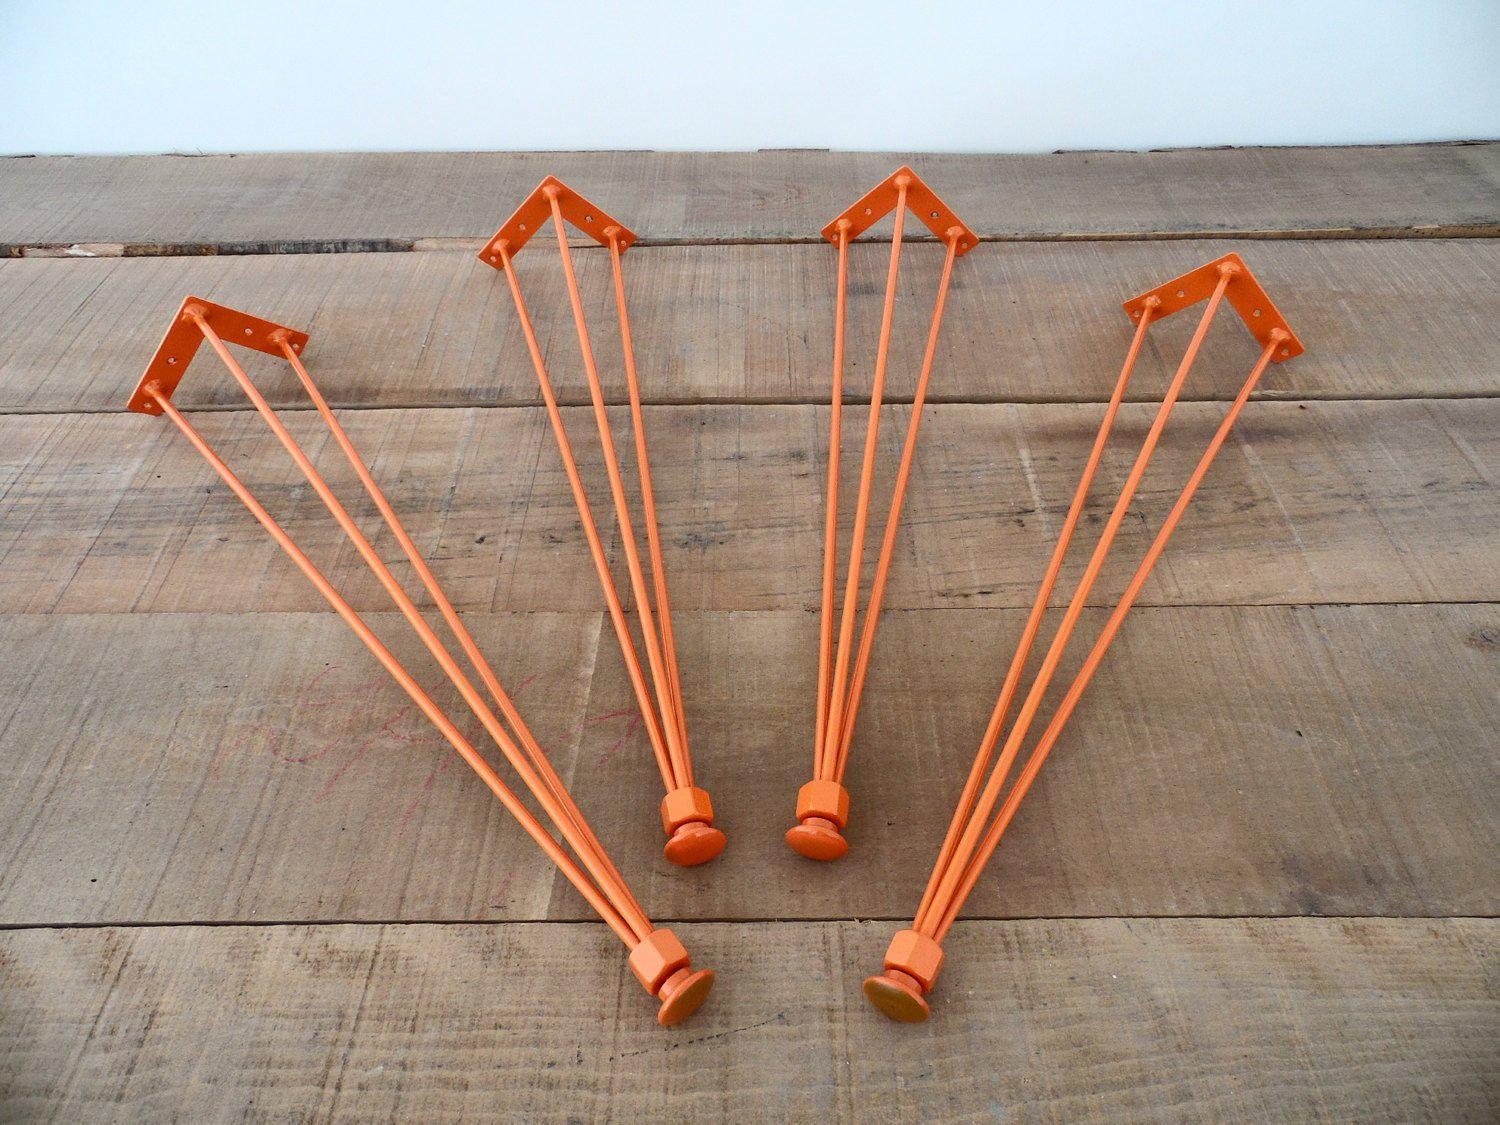 40" 3-pin-nuts Table Legs, Height 33" To 40" Set(4)